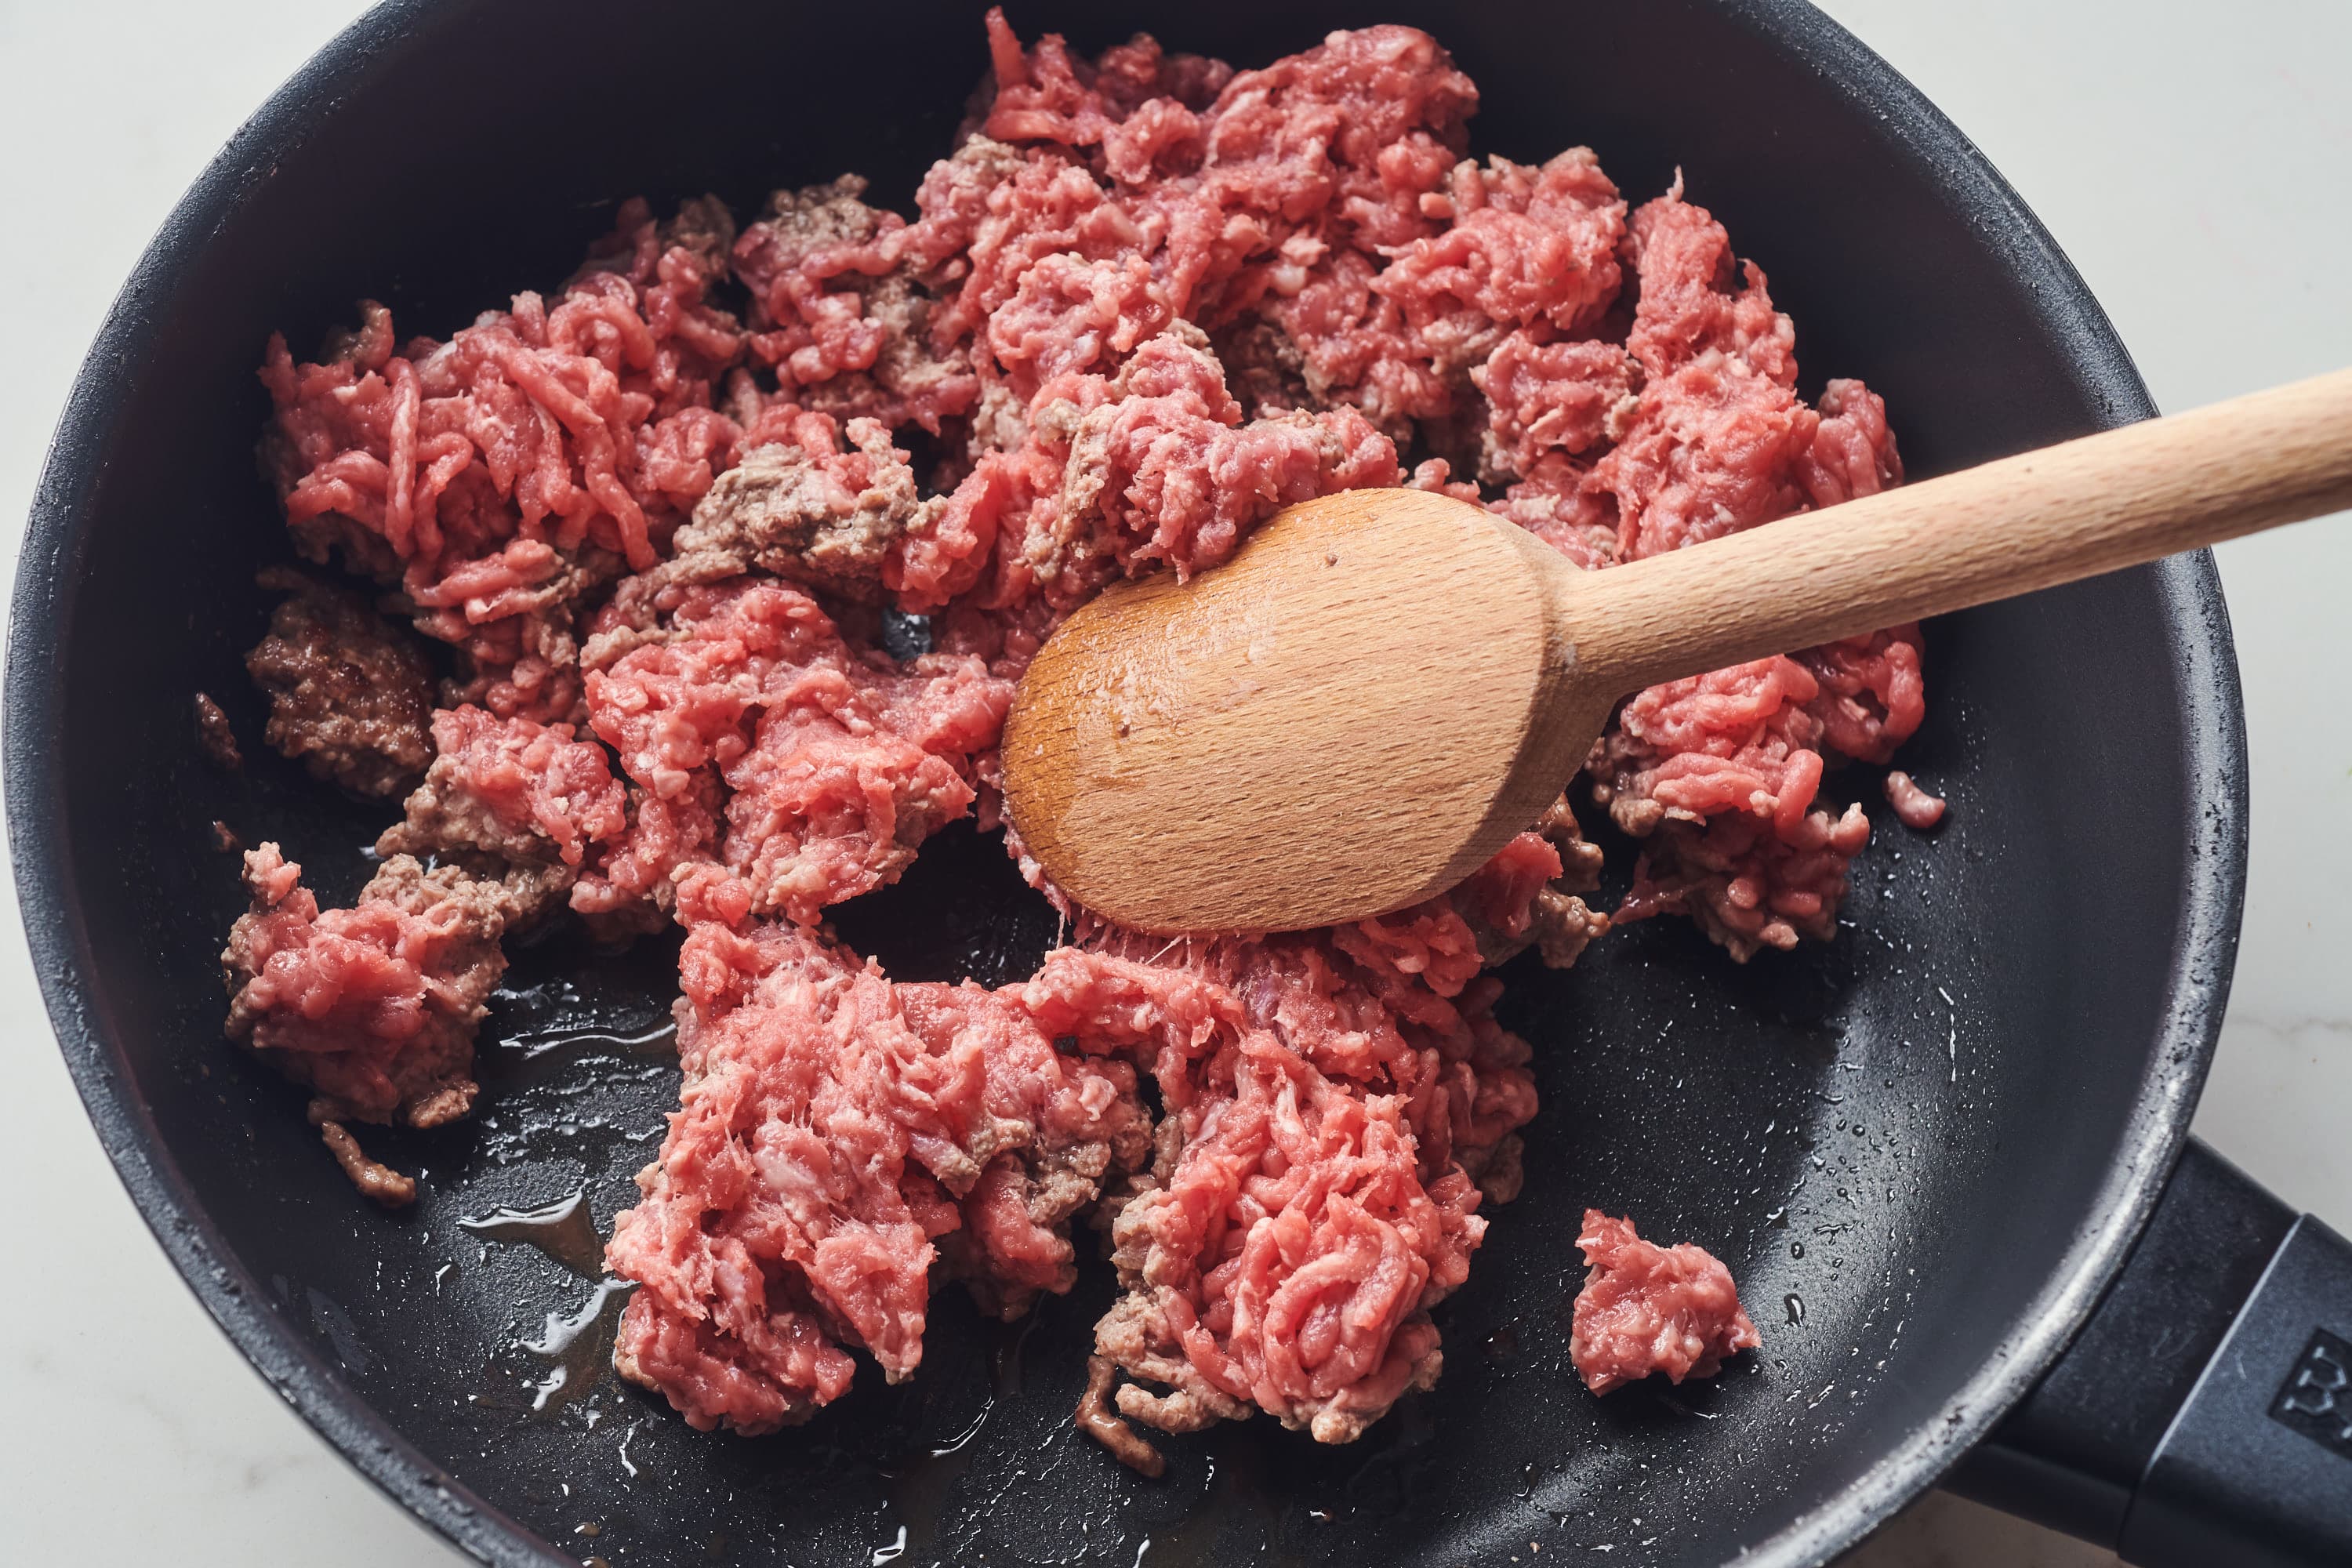 The Secret To Browning Ground Beef Into Small Crumbles, According